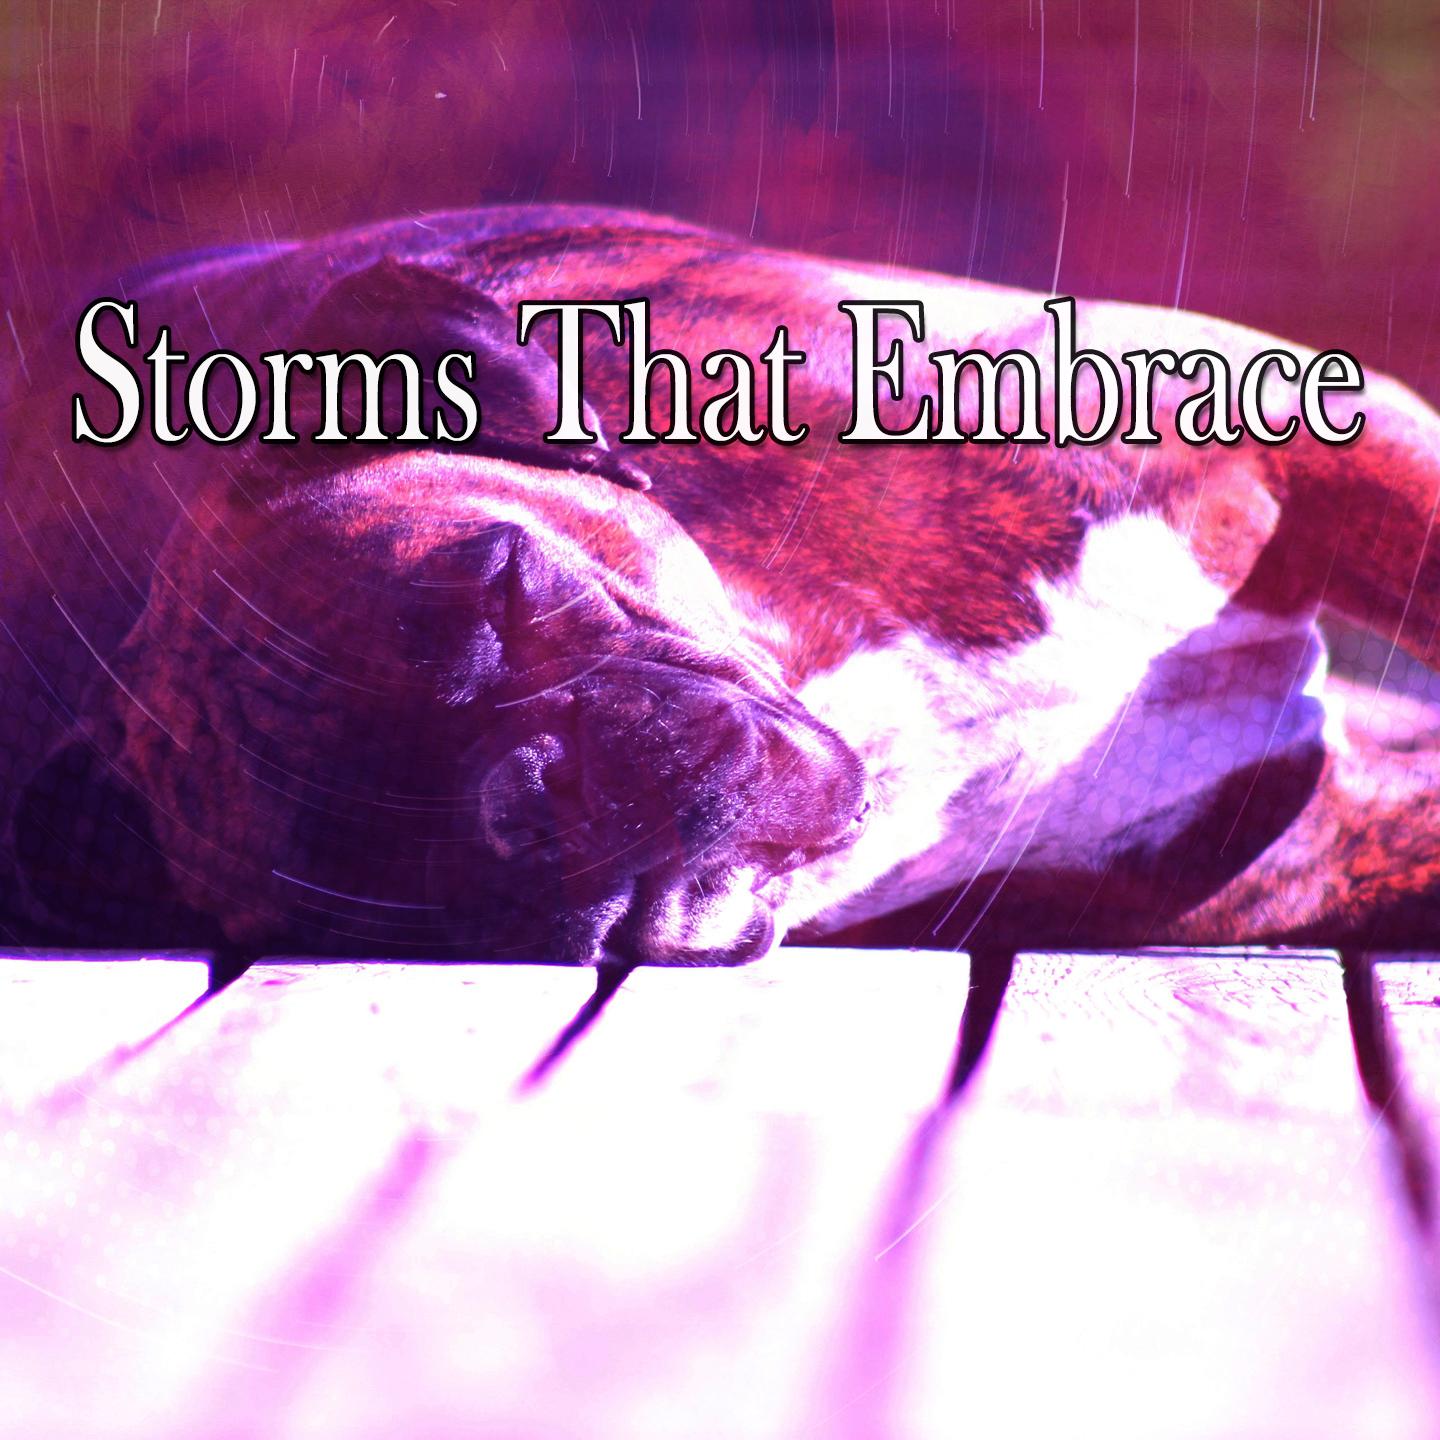 Storms That Embrace